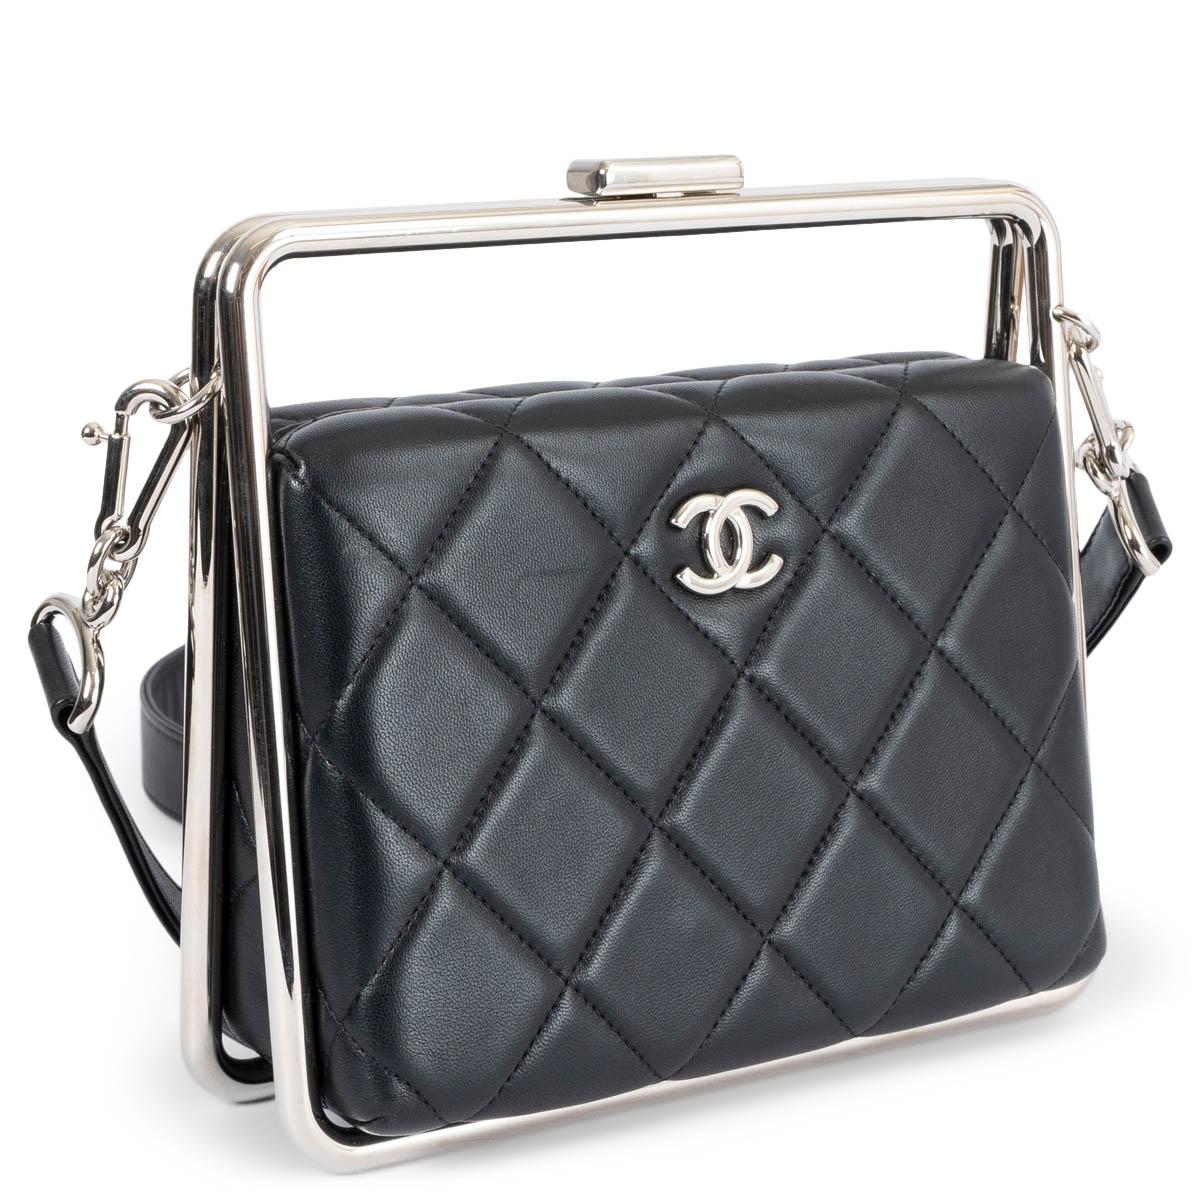 100% authentic Chanel 2020 shoulder bag/clutch in black quilted lambskin featuring silver-tone hardware. The design comes with a metal bar frame and a detachable shoulder-strap. Lined in black grosgrain with a slip pocket against the back. Has been